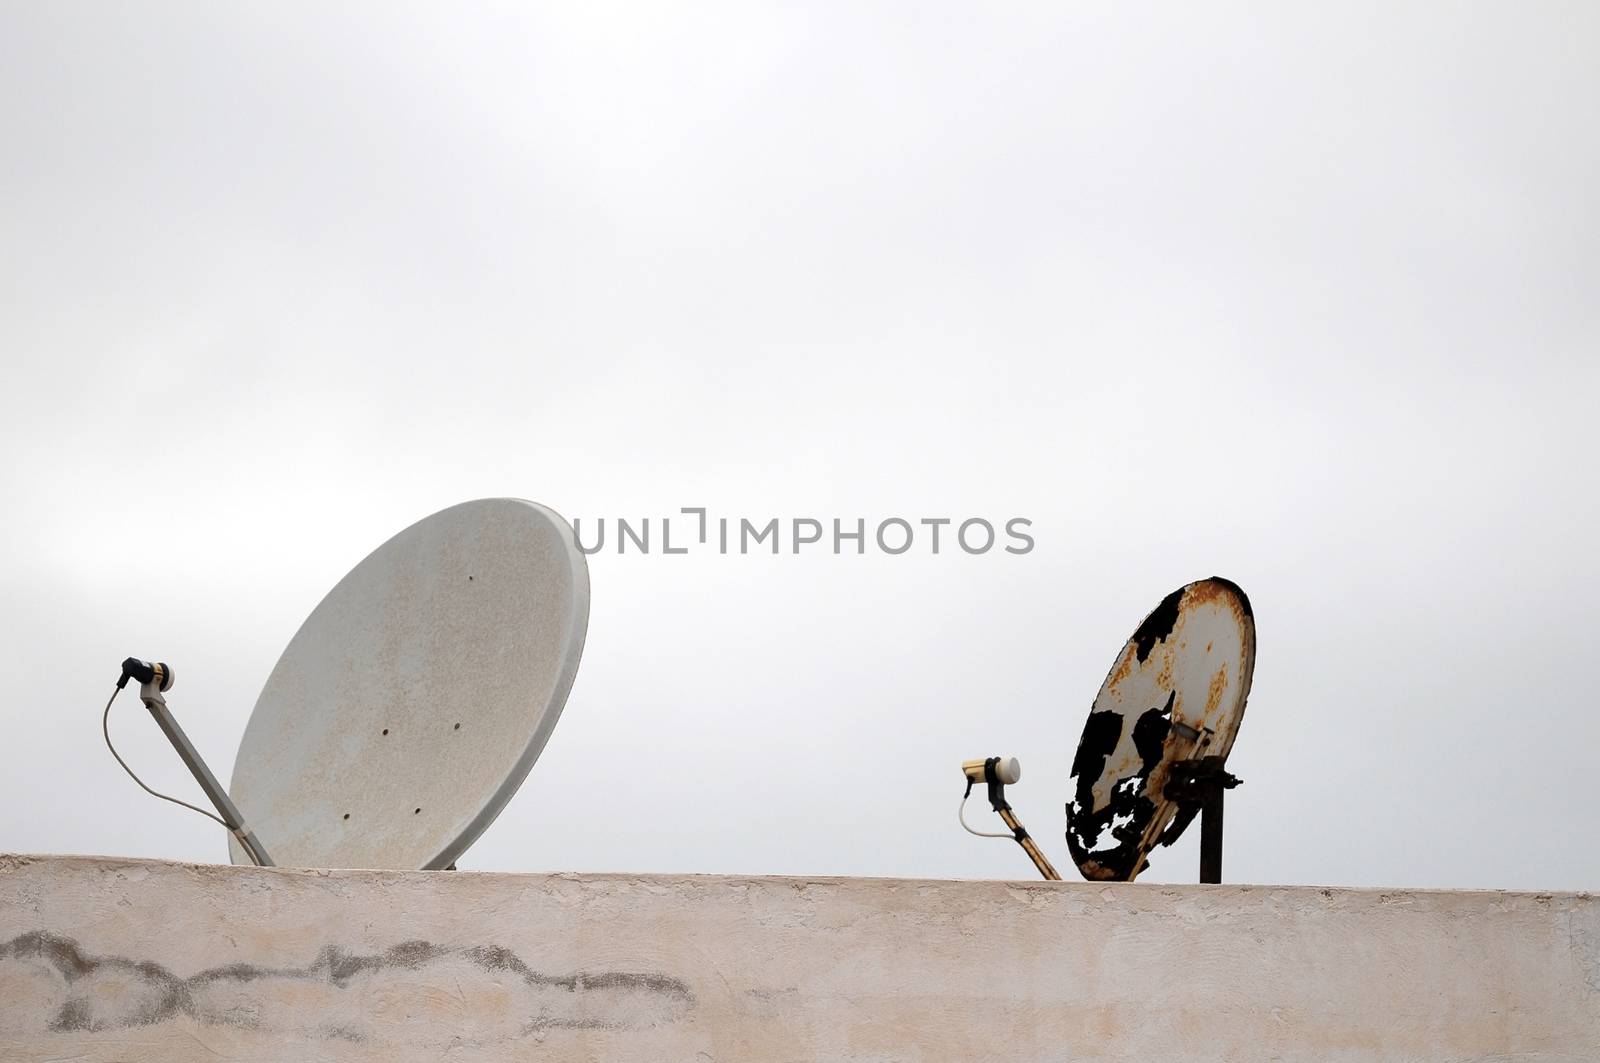 Antennas on a Roof over a Cloudy Sky, in Canary Islands, Spain